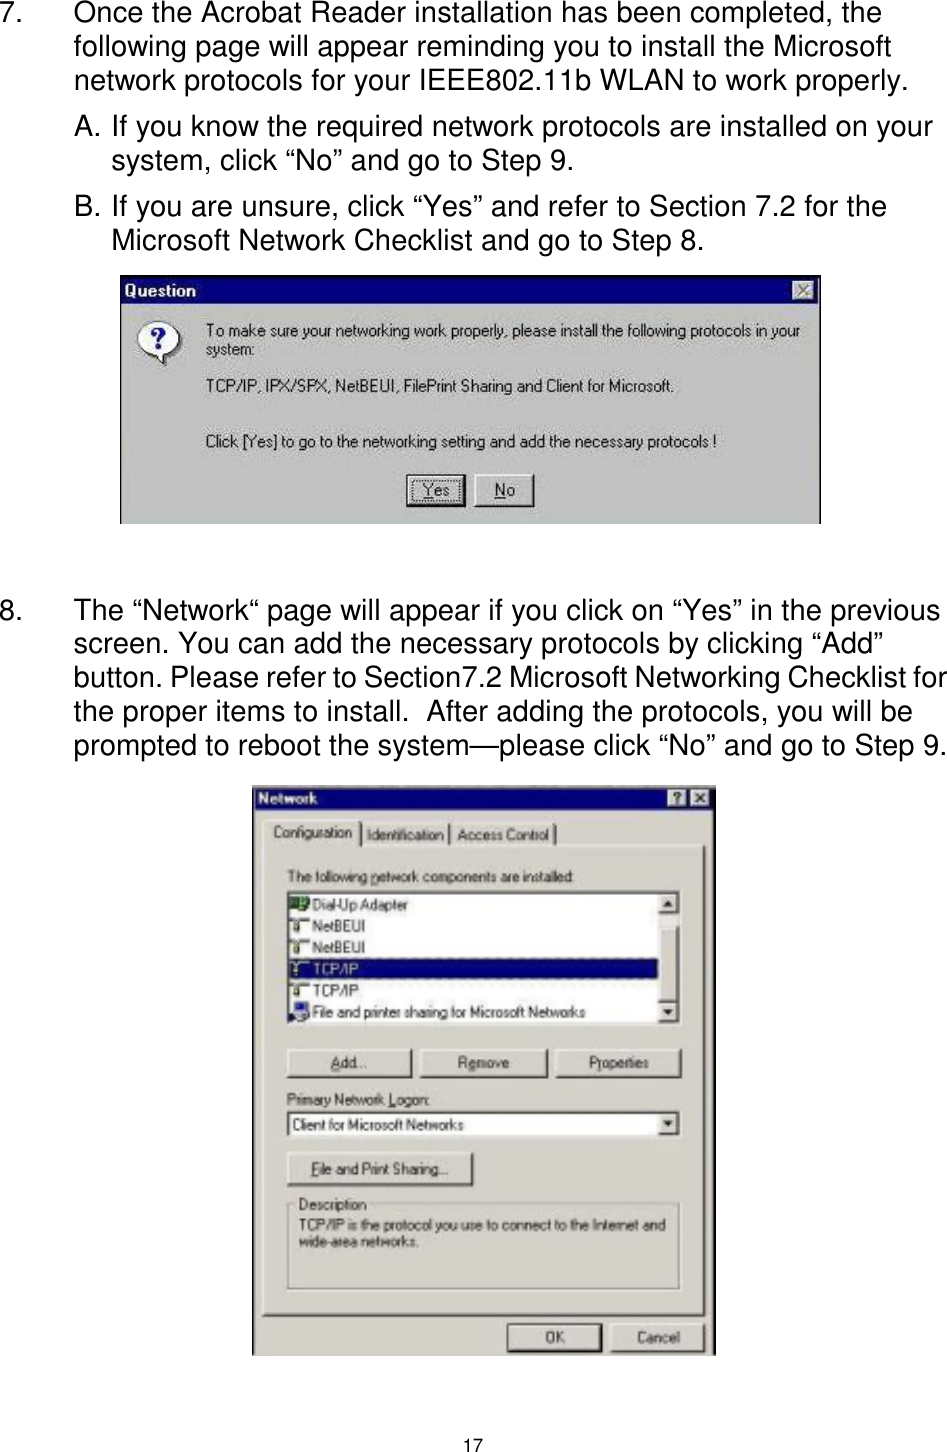  17  7.  Once the Acrobat Reader installation has been completed, the following page will appear reminding you to install the Microsoft network protocols for your IEEE802.11b WLAN to work properly.  A. If you know the required network protocols are installed on your system, click “No” and go to Step 9. B. If you are unsure, click “Yes” and refer to Section 7.2 for the Microsoft Network Checklist and go to Step 8.        8.  The “Network“ page will appear if you click on “Yes” in the previous screen. You can add the necessary protocols by clicking “Add” button. Please refer to Section7.2 Microsoft Networking Checklist for the proper items to install.  After adding the protocols, you will be prompted to reboot the system—please click “No” and go to Step 9.            